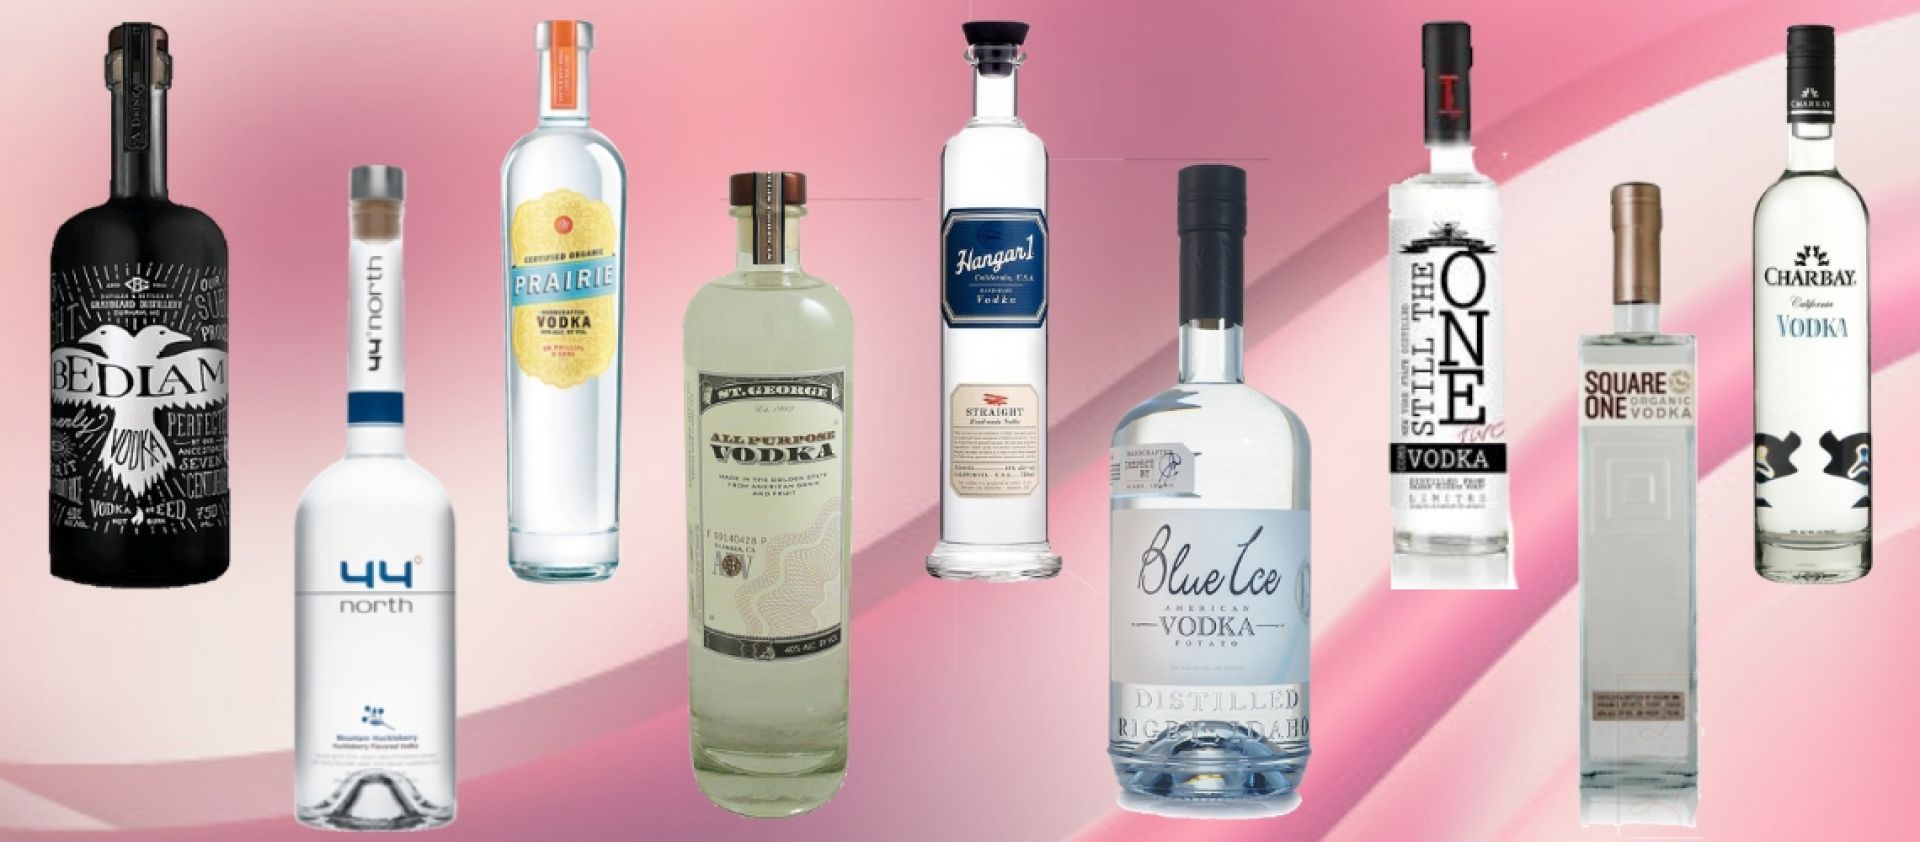 Photo for: Top 10 American Craft Vodka Brands